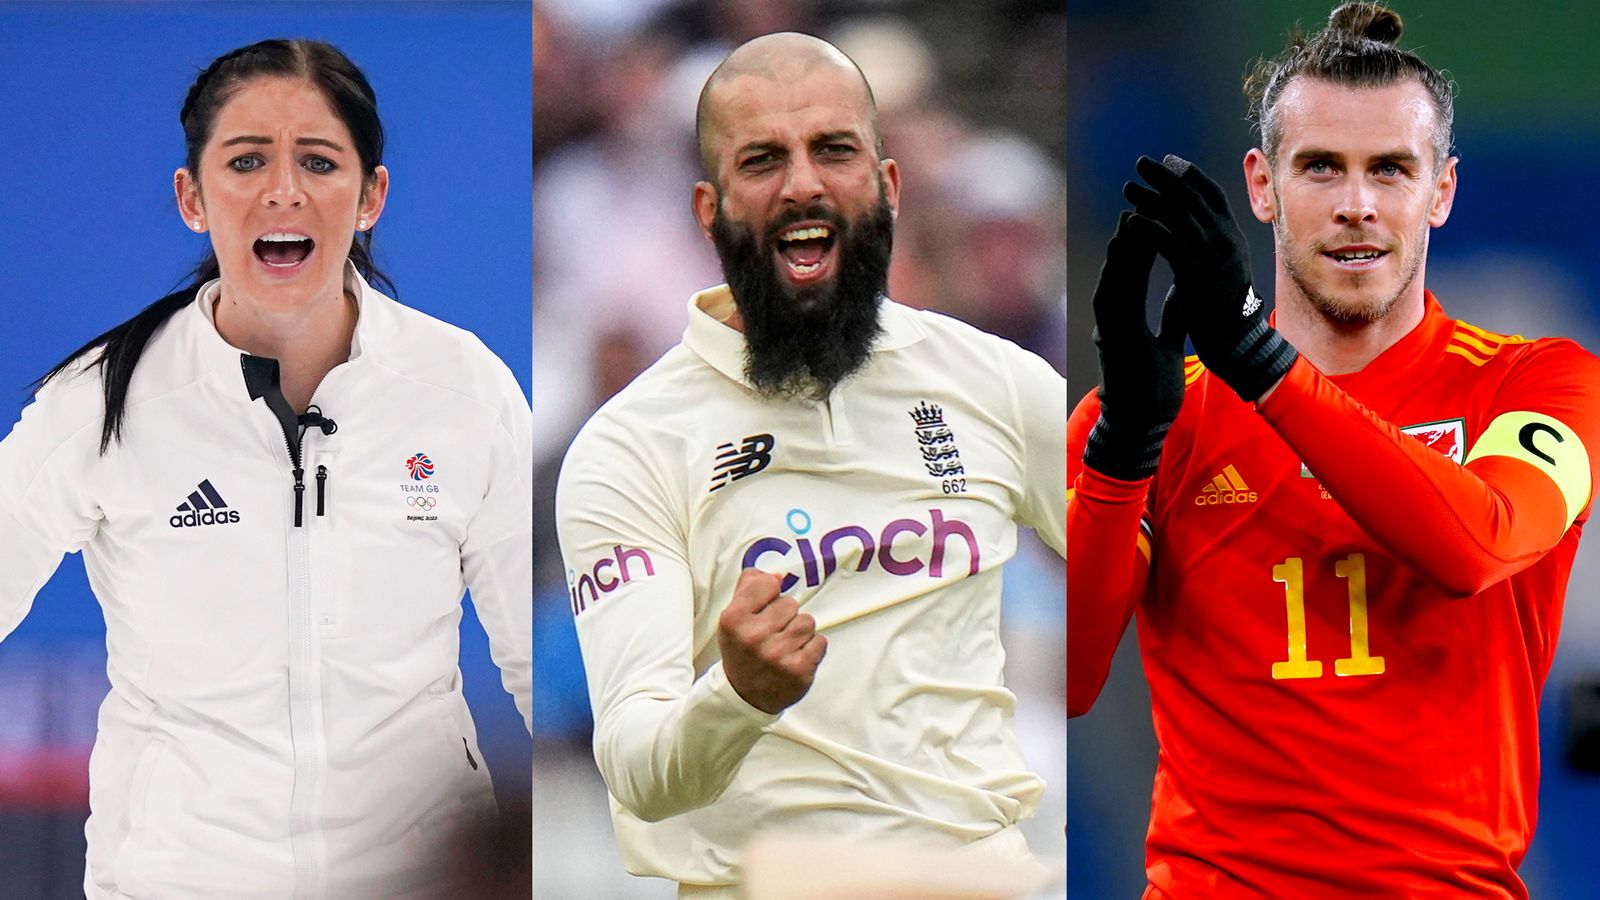 Queen's Birthday Honours list: Gareth Bale, Moeen Ali and Eve Muirhead among sporting stars named